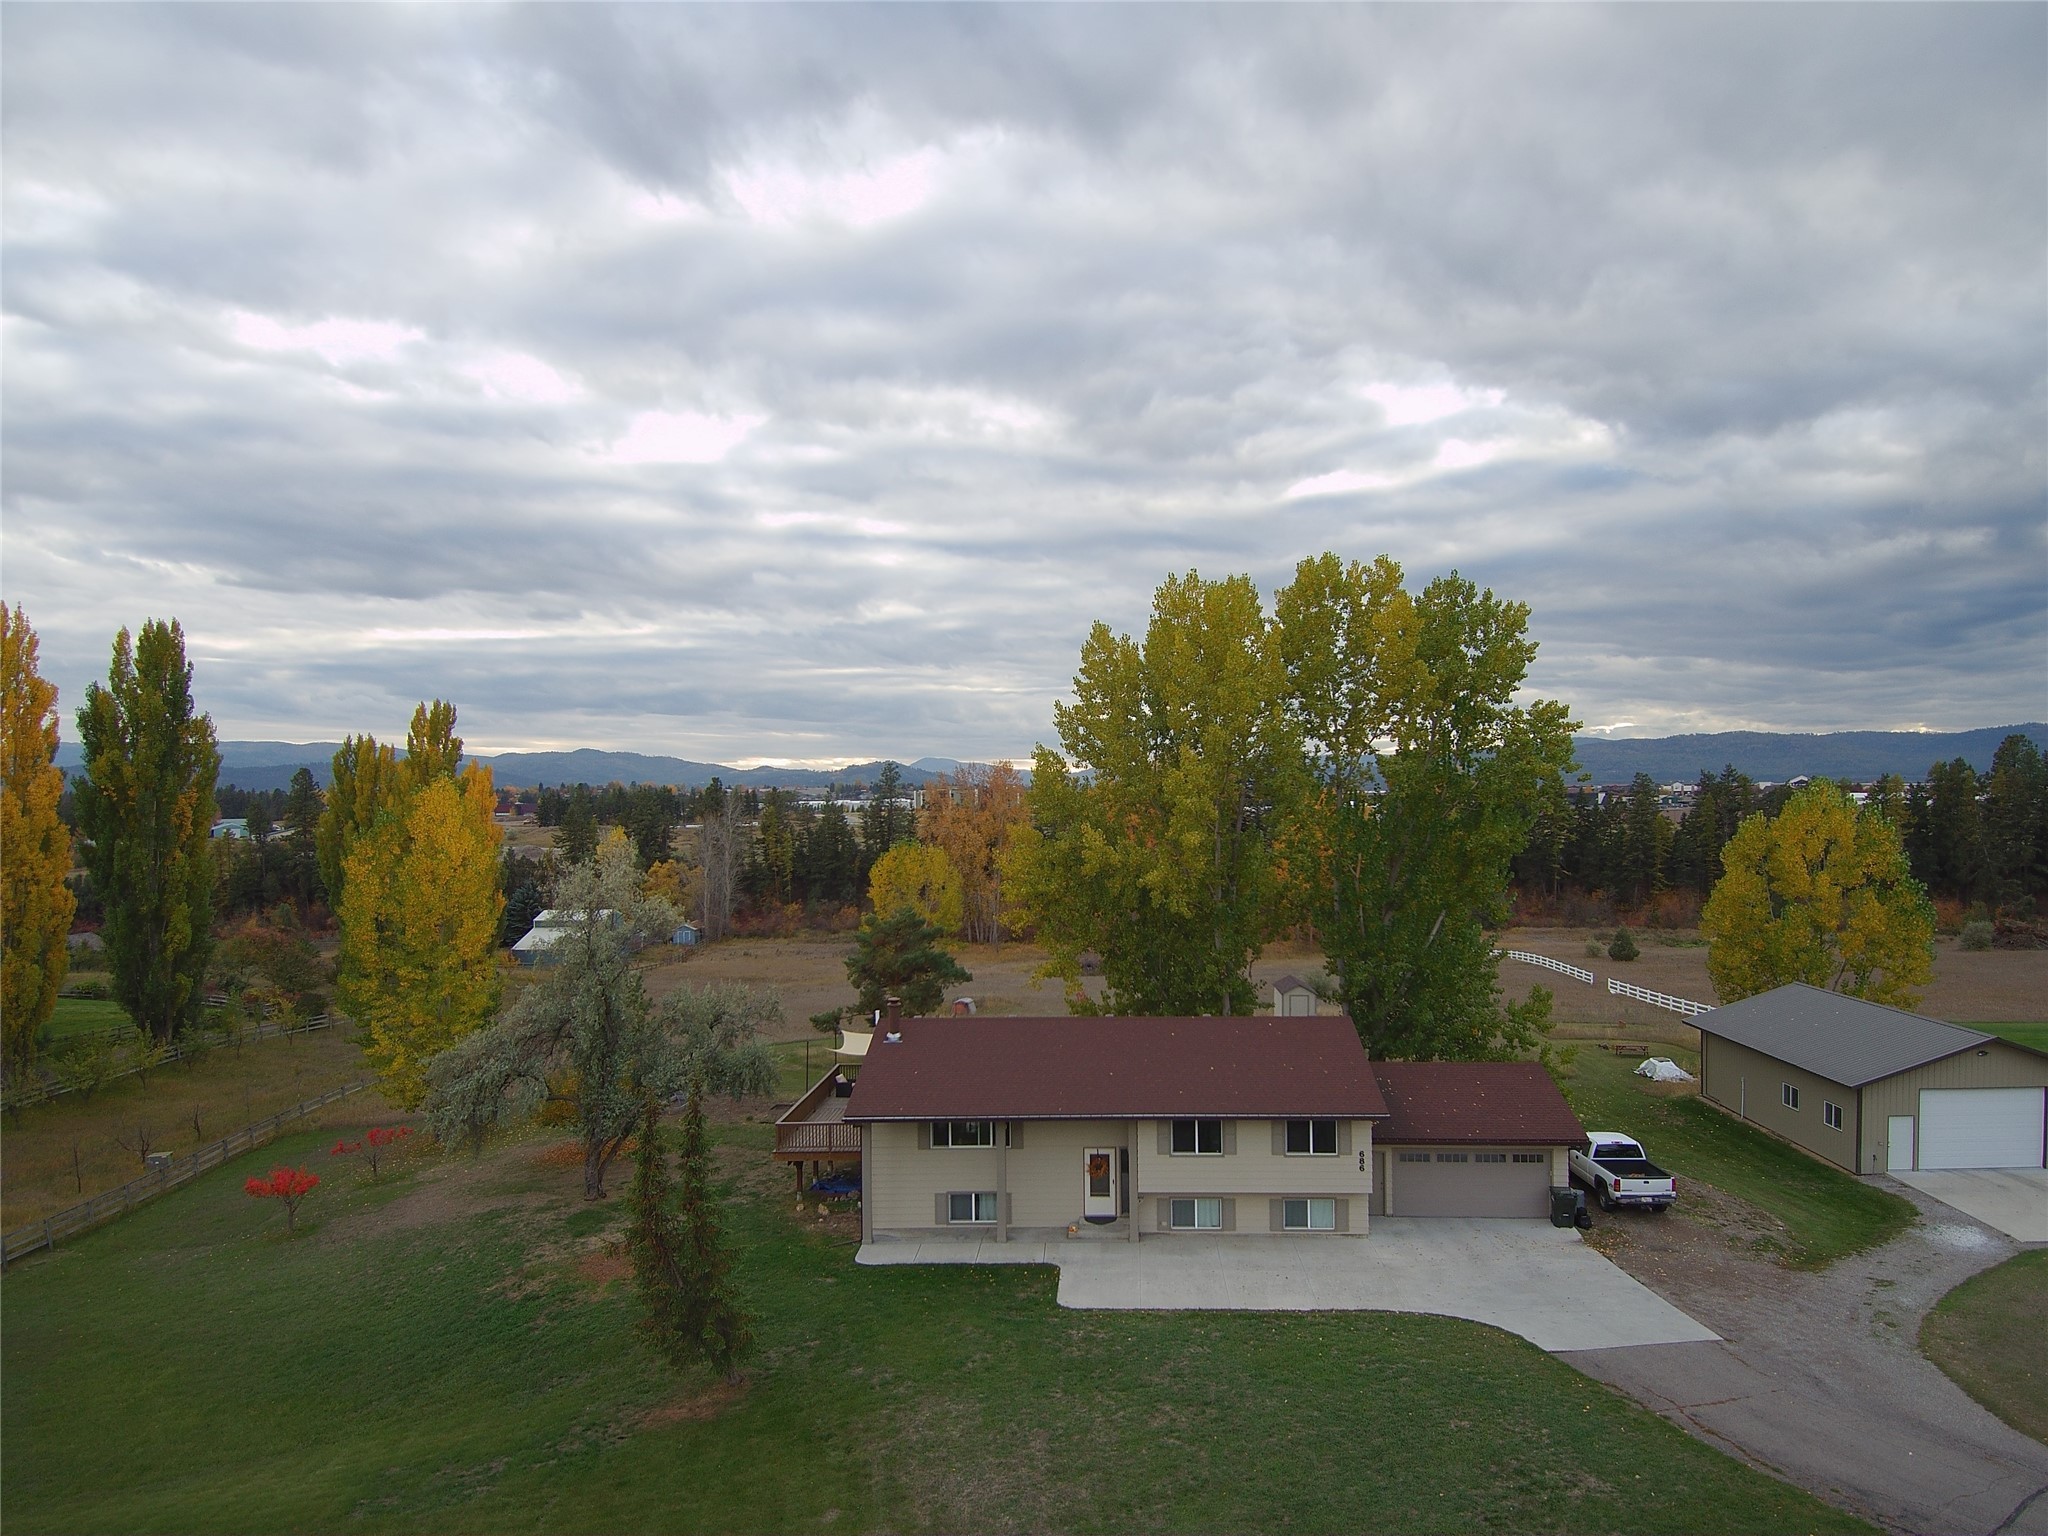 Rare offering! Great location adjacent to Kalispell, this 4-bedroom + office, 3-bath home on a 5-acre lot has approximately 350' of Stillwater River frontage, a 30'x40' shop, and views of the Swan mountains. Who says you can't have it all? The home features a large deck, attached double garage, natural gas heat and fireplace, master bathroom with a claw-foot soaking tub, large family room in the lower level, updated kitchen and great built-ins in the living room. Store all of your toys in the 1200 square foot shop. Outside is a dog run, a garden spot, and beautiful mature trees. All of this is located in a lovely neighborhood that is very convenient to the shops and restaurants at the north end of town, along with close proximity to medical facilities and the hospital. Call Bill Leininger at 406-253-7333 or your real estate professional.